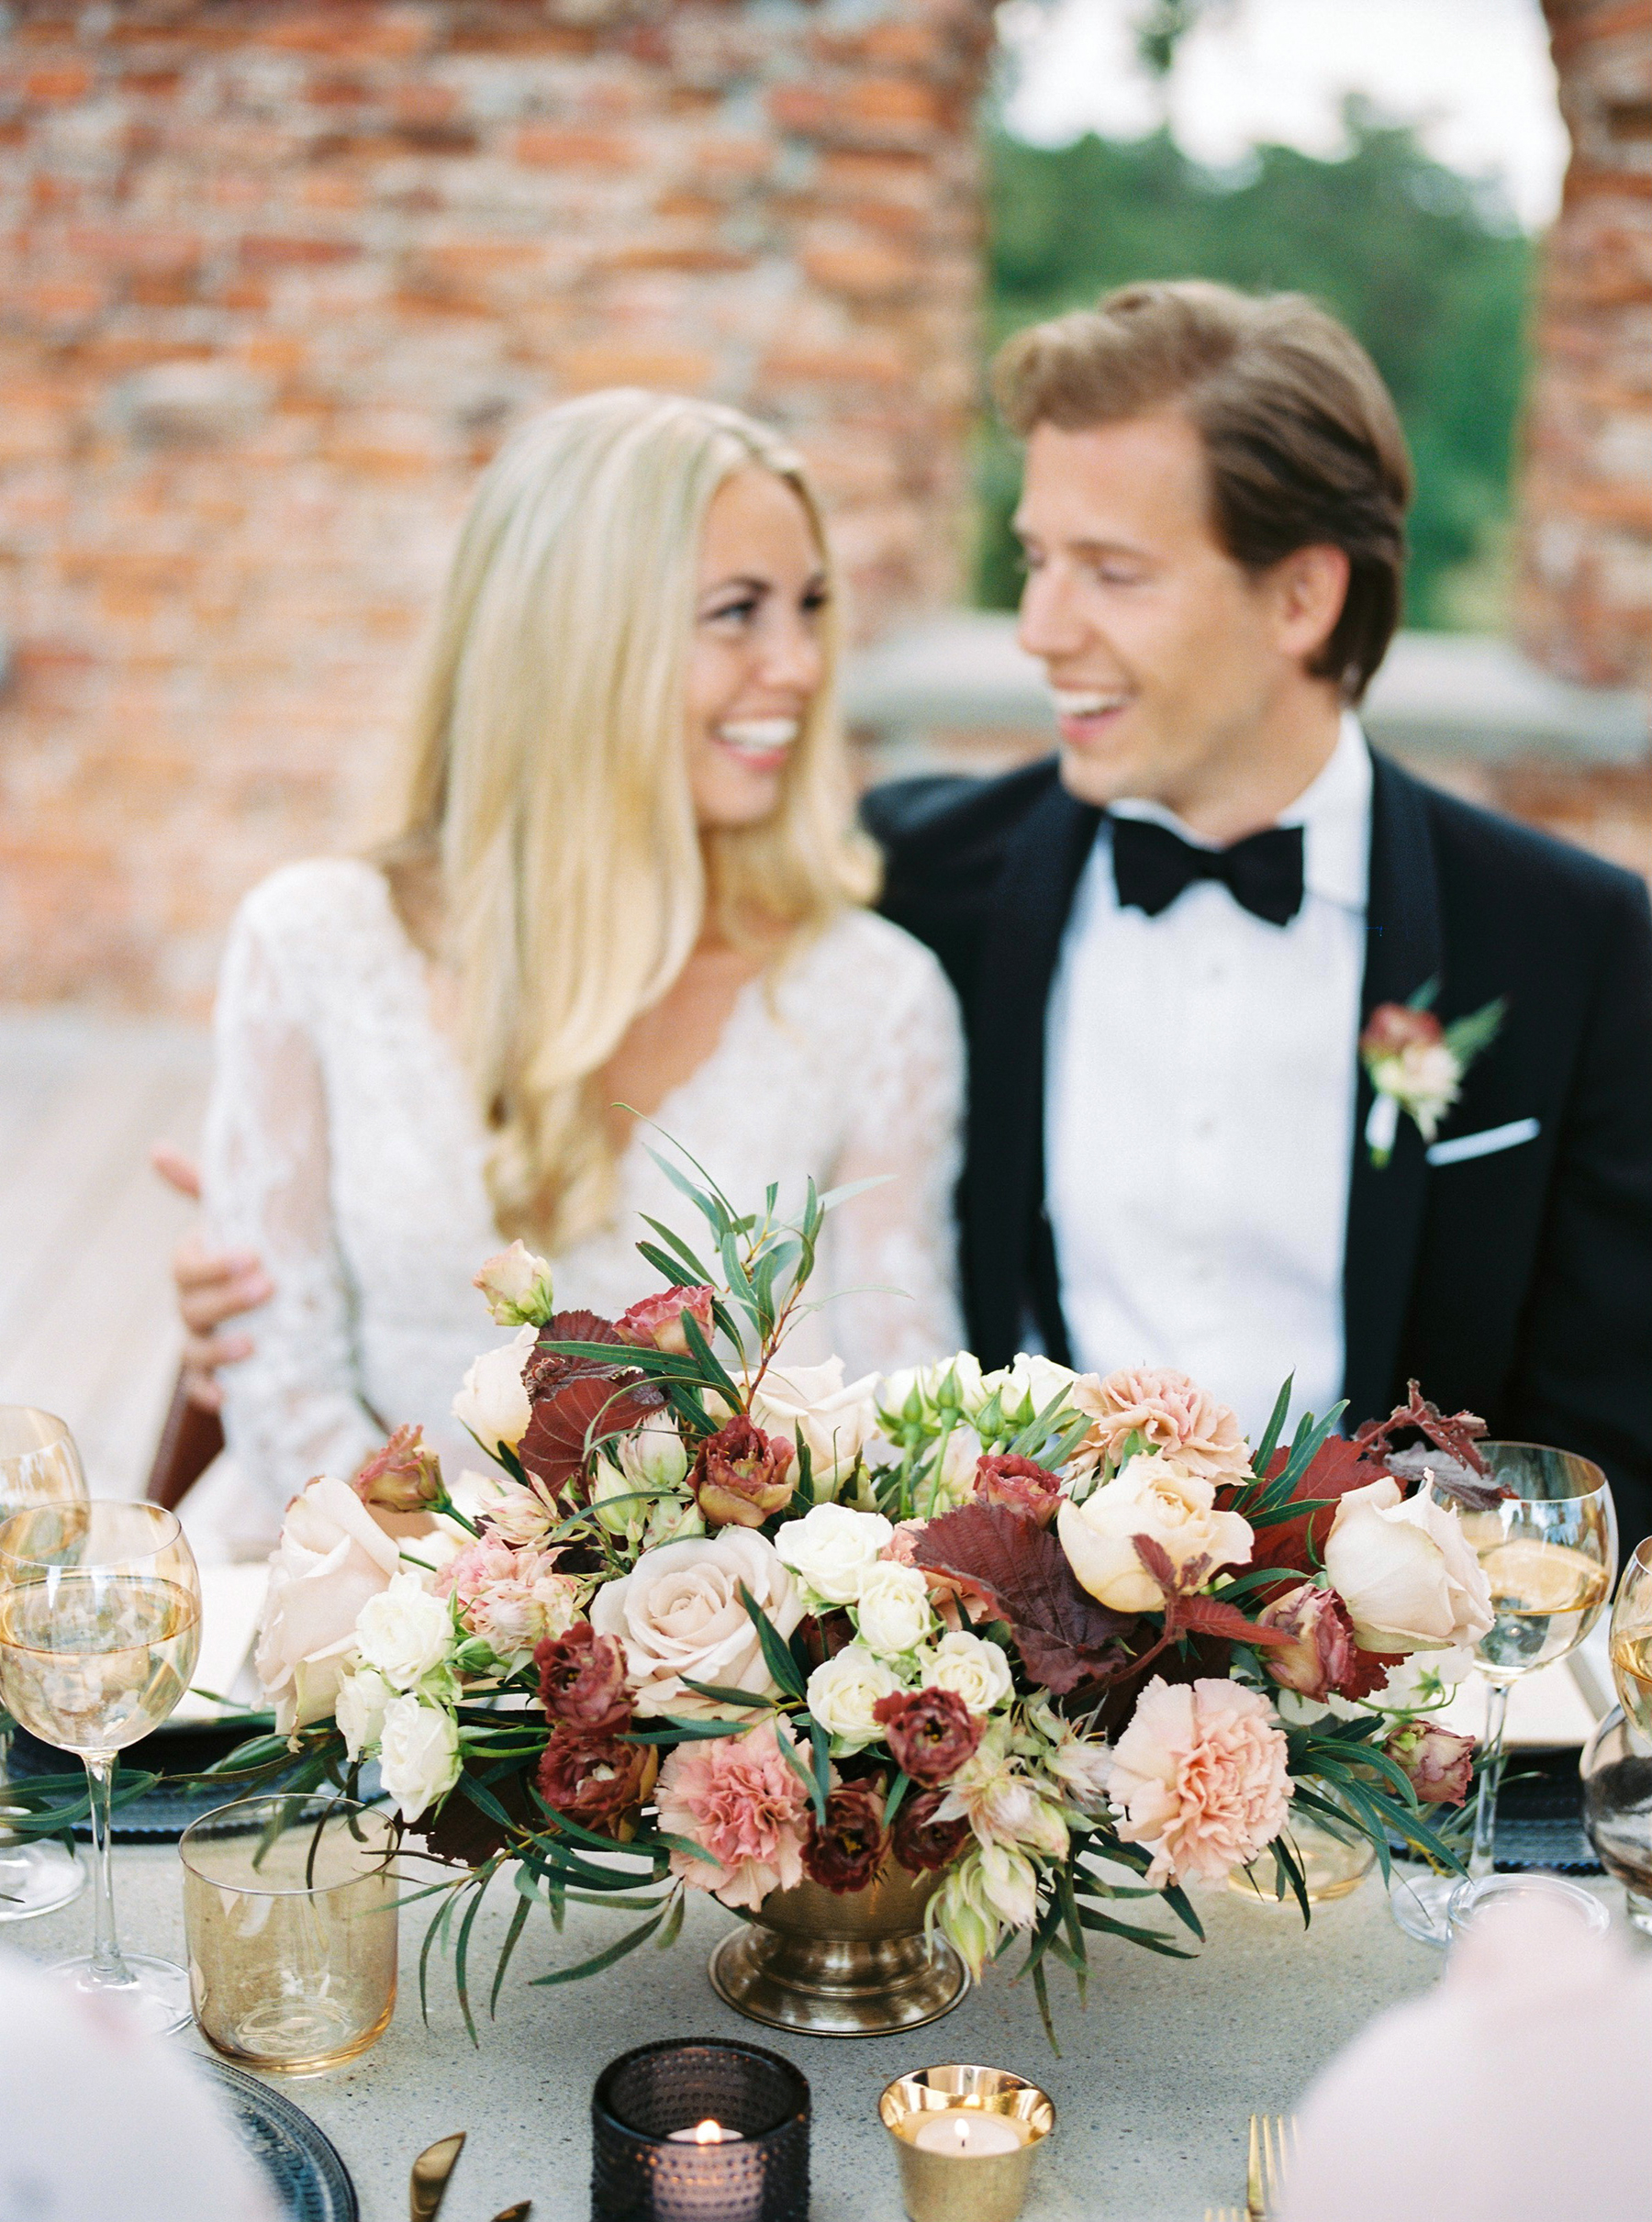 Bright and Warm Colored Wedding Inspiration in Sweden 2 Brides Photography53